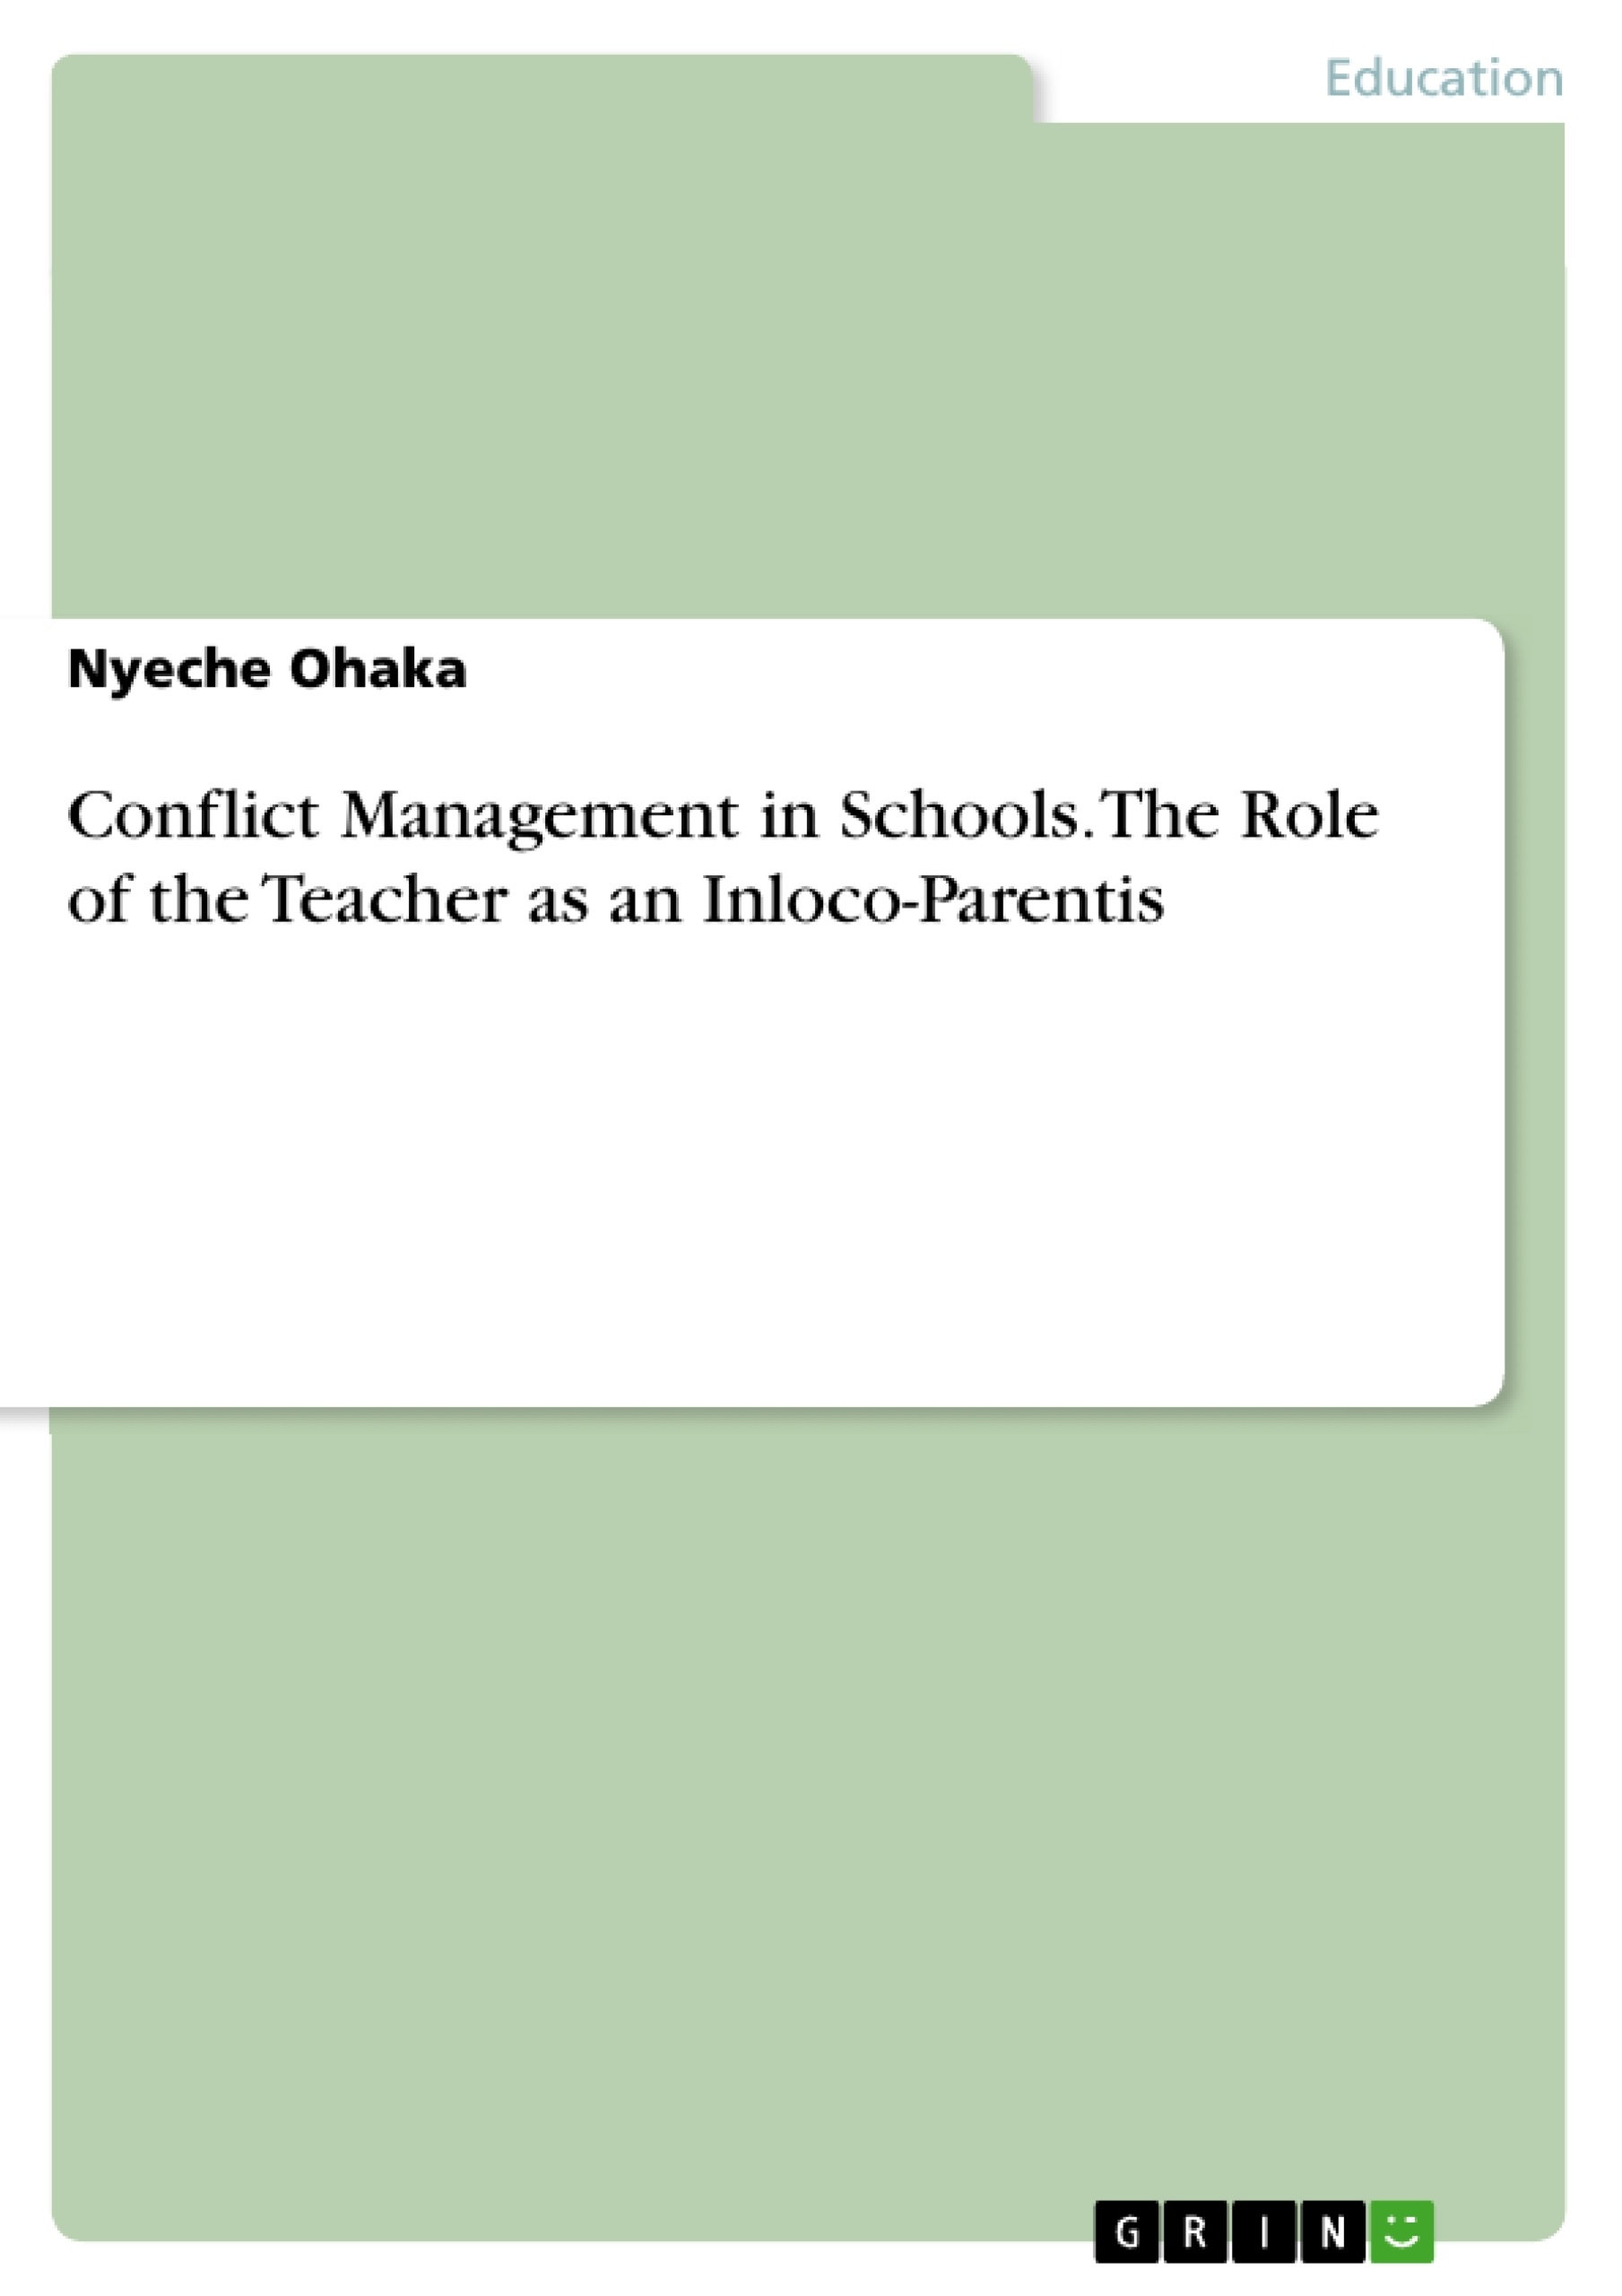 Title: Conflict Management in Schools. The Role of the Teacher as an Inloco-Parentis